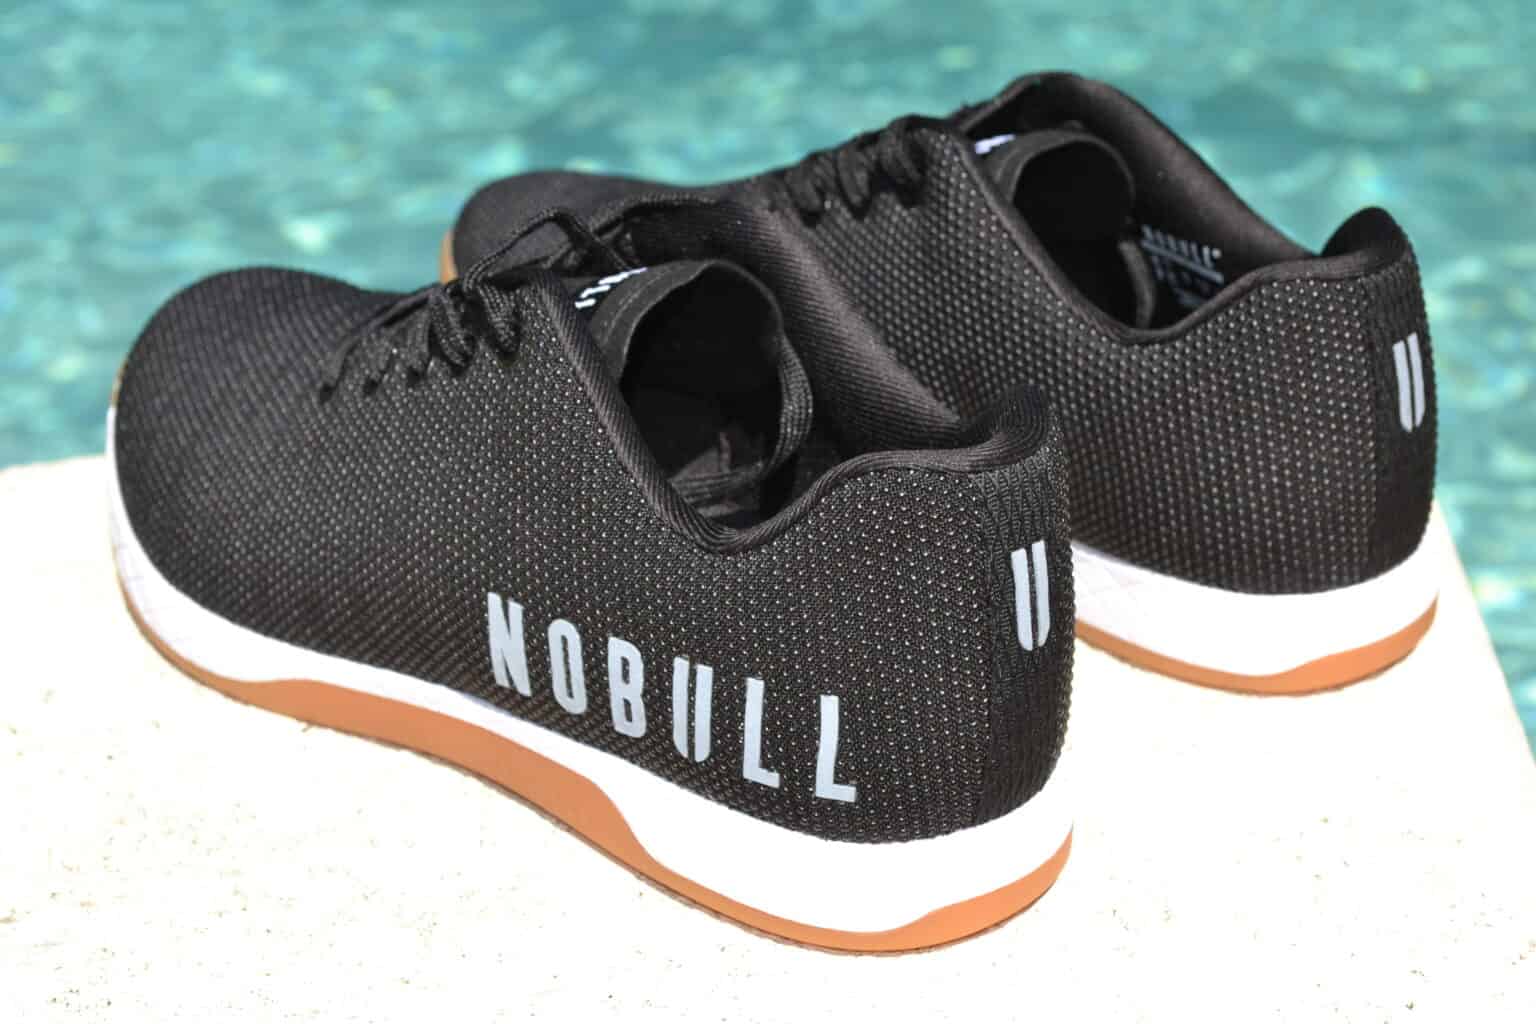 NOBULL Trainer Review Cross Train Clothes